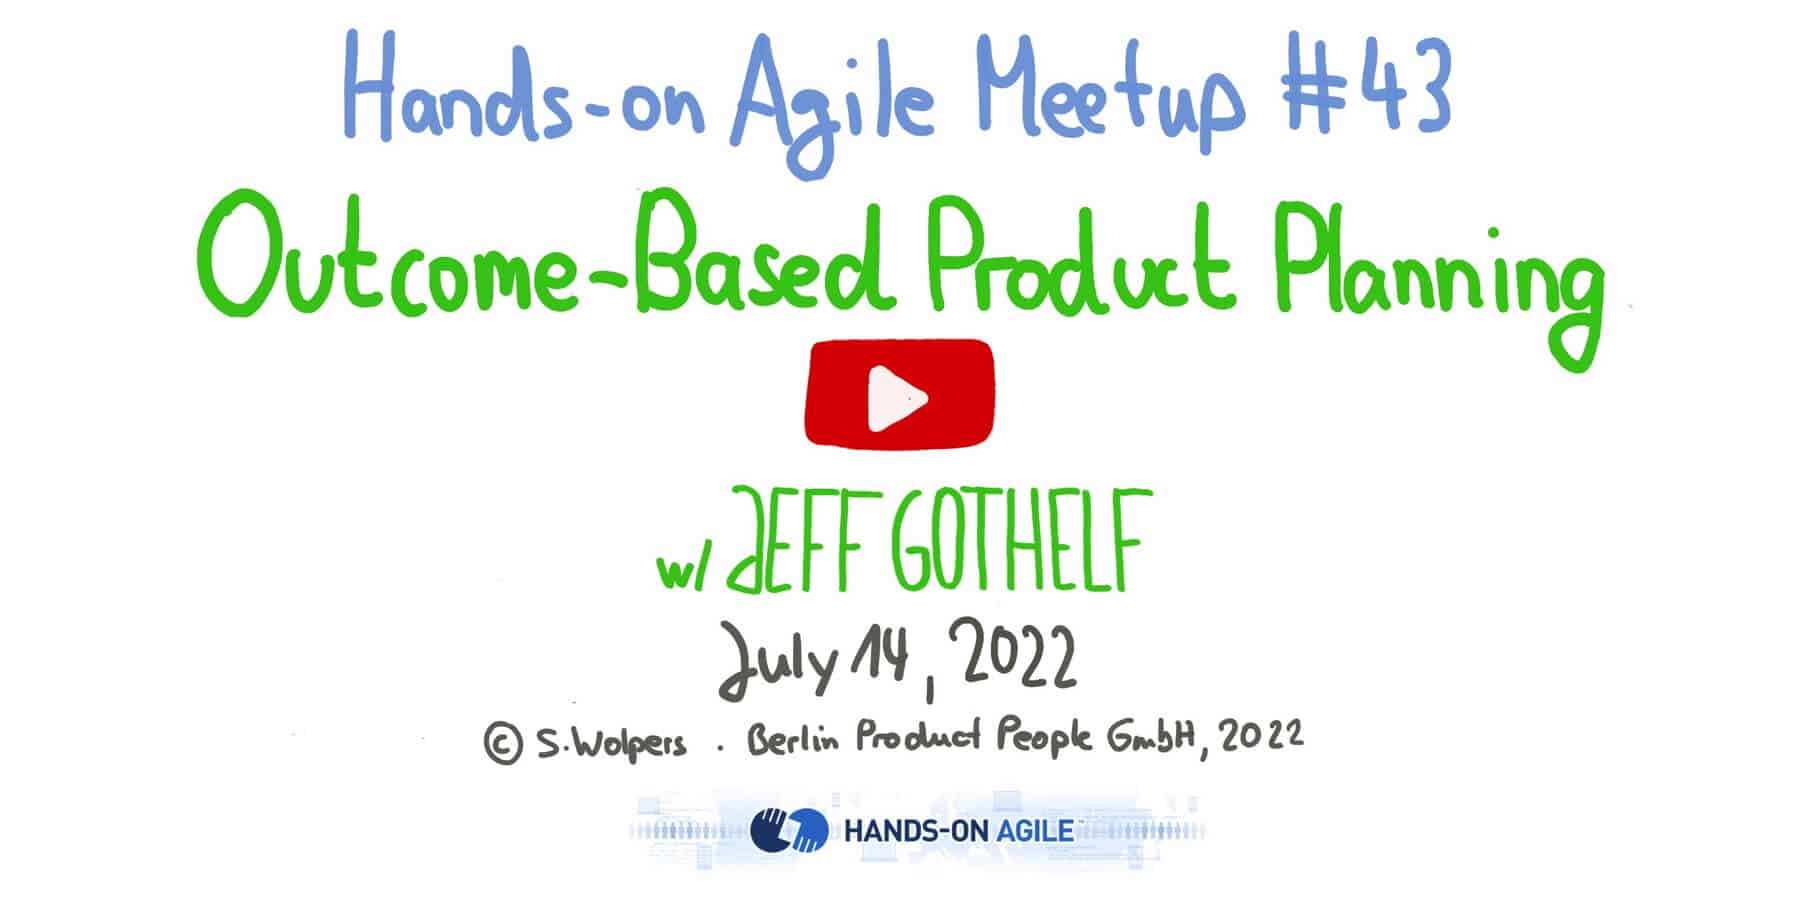 Jeff Gothelf: Outcome-Based Product Planning — Hands-on Agile 43 — Berlin Product People GmbH